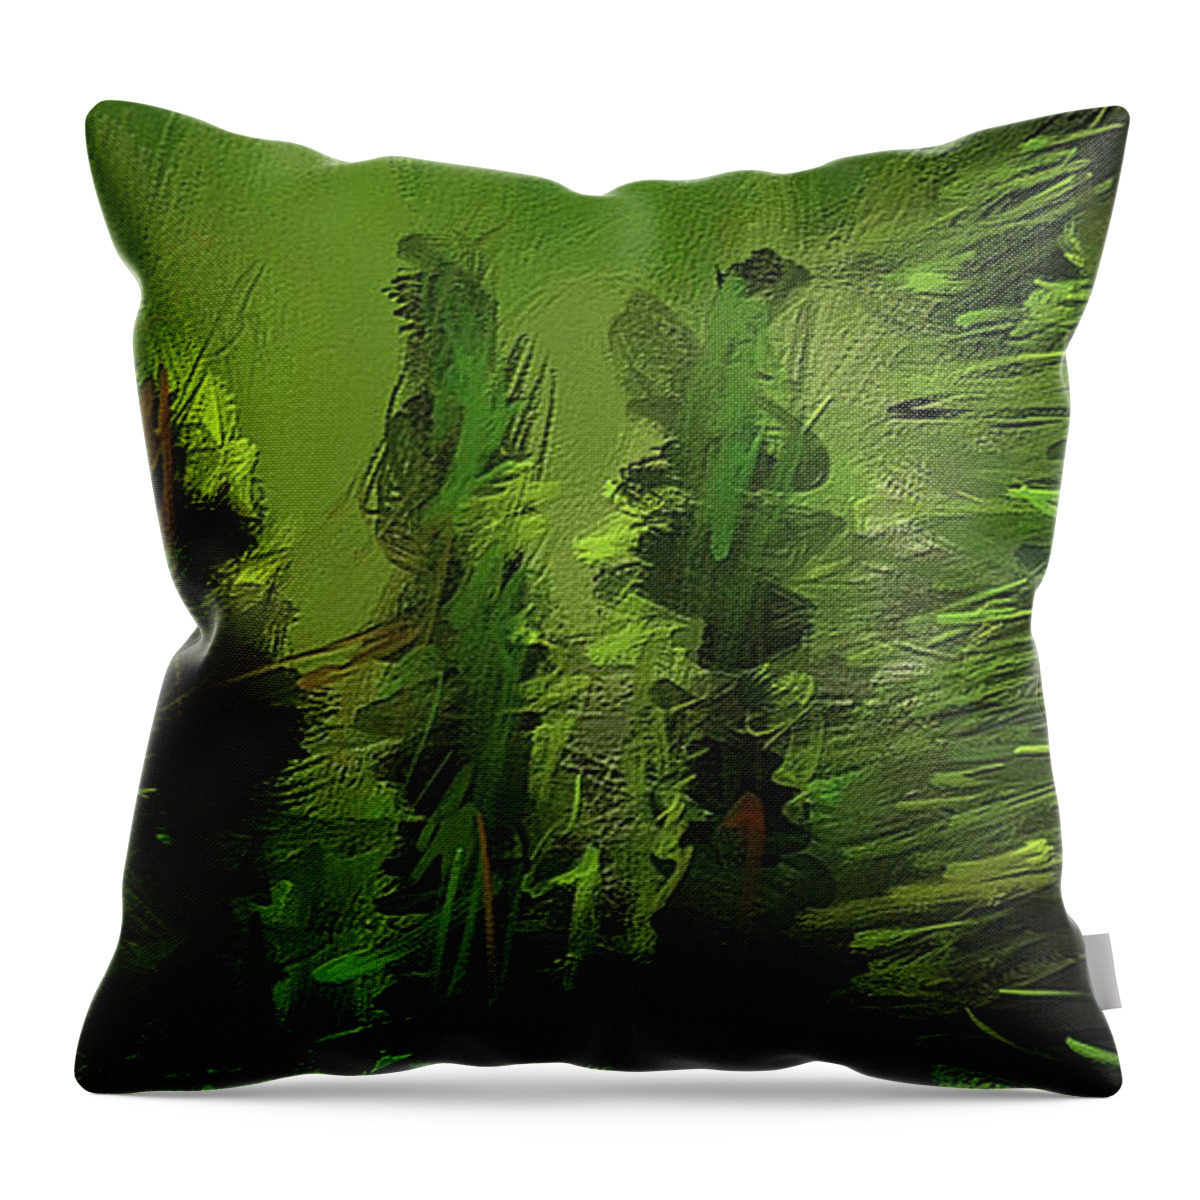 Green Throw Pillow featuring the painting Evergreens - Green Abstract Art by Lourry Legarde